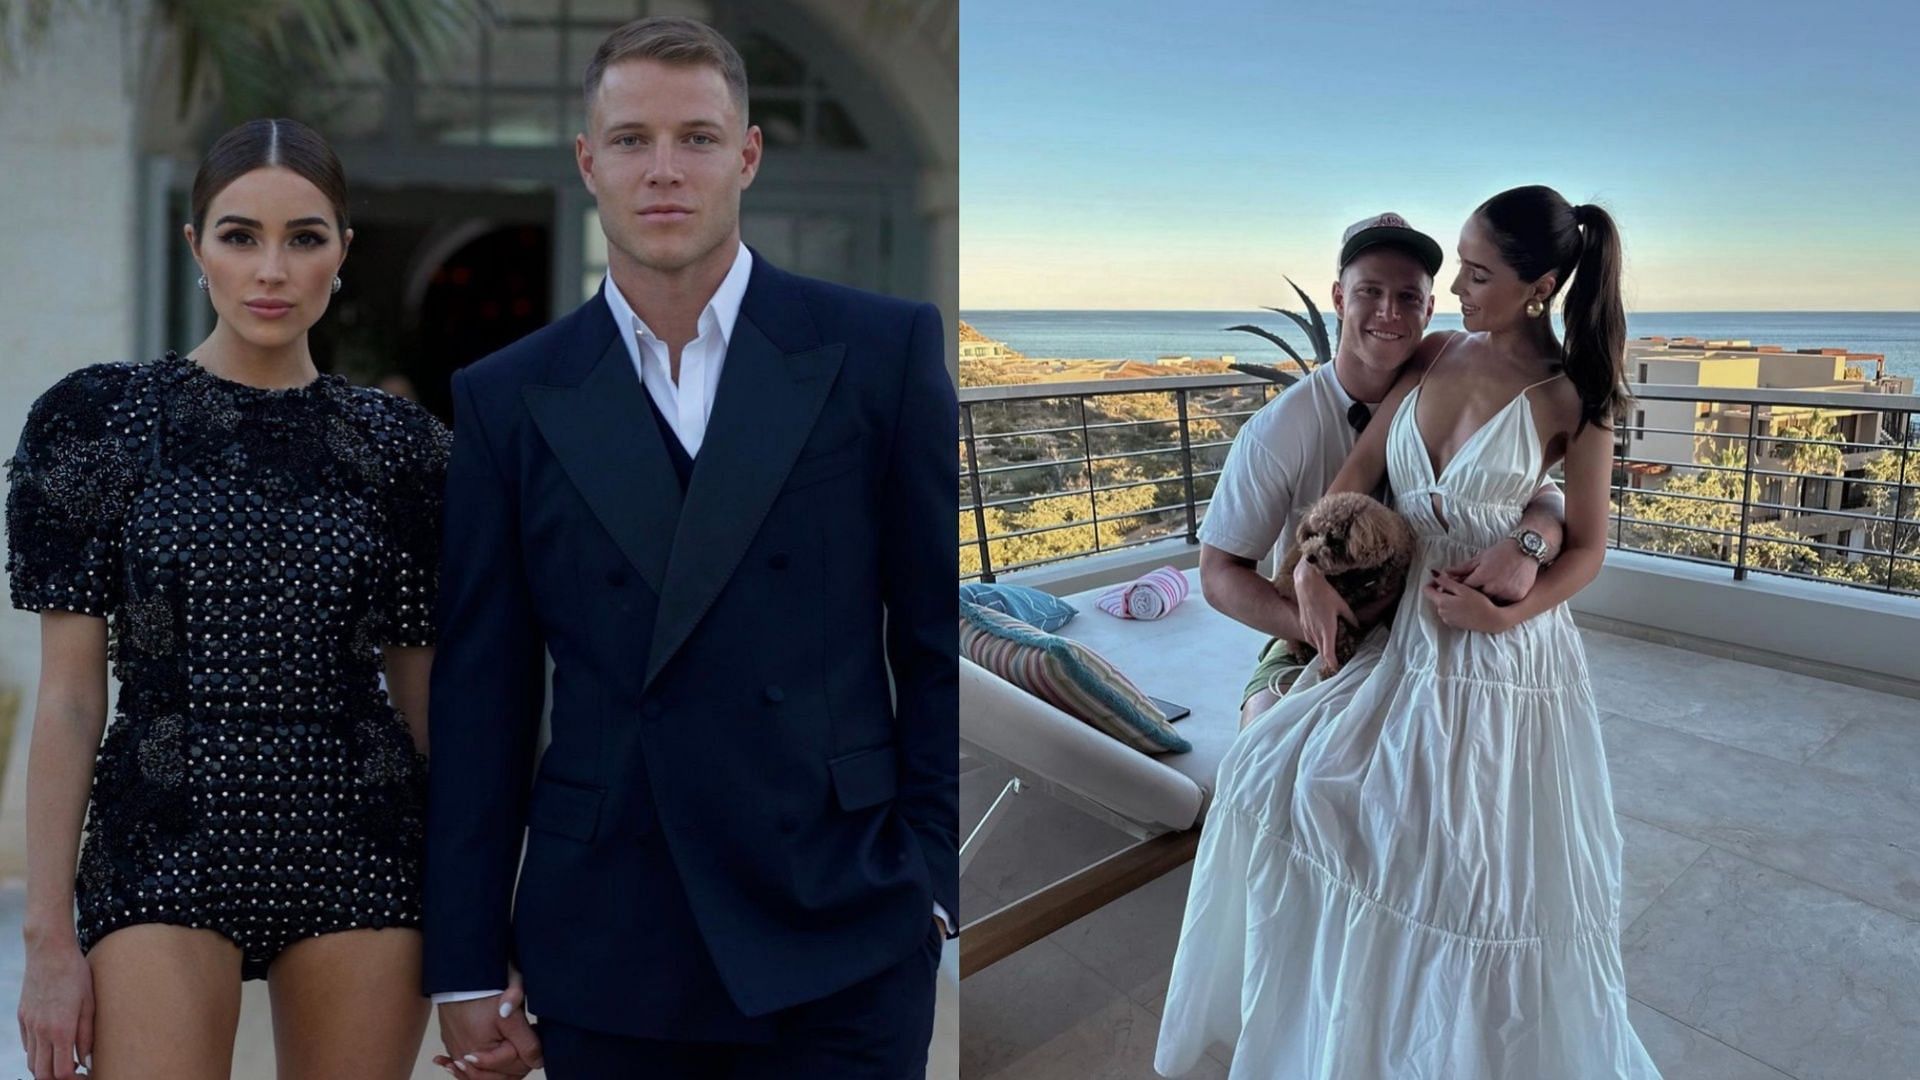 Fans want Christian McCaffrey and Olivia Culpo to get married. (Images via Instagram/@christianmccaffrey &amp; @oliviaculpo)